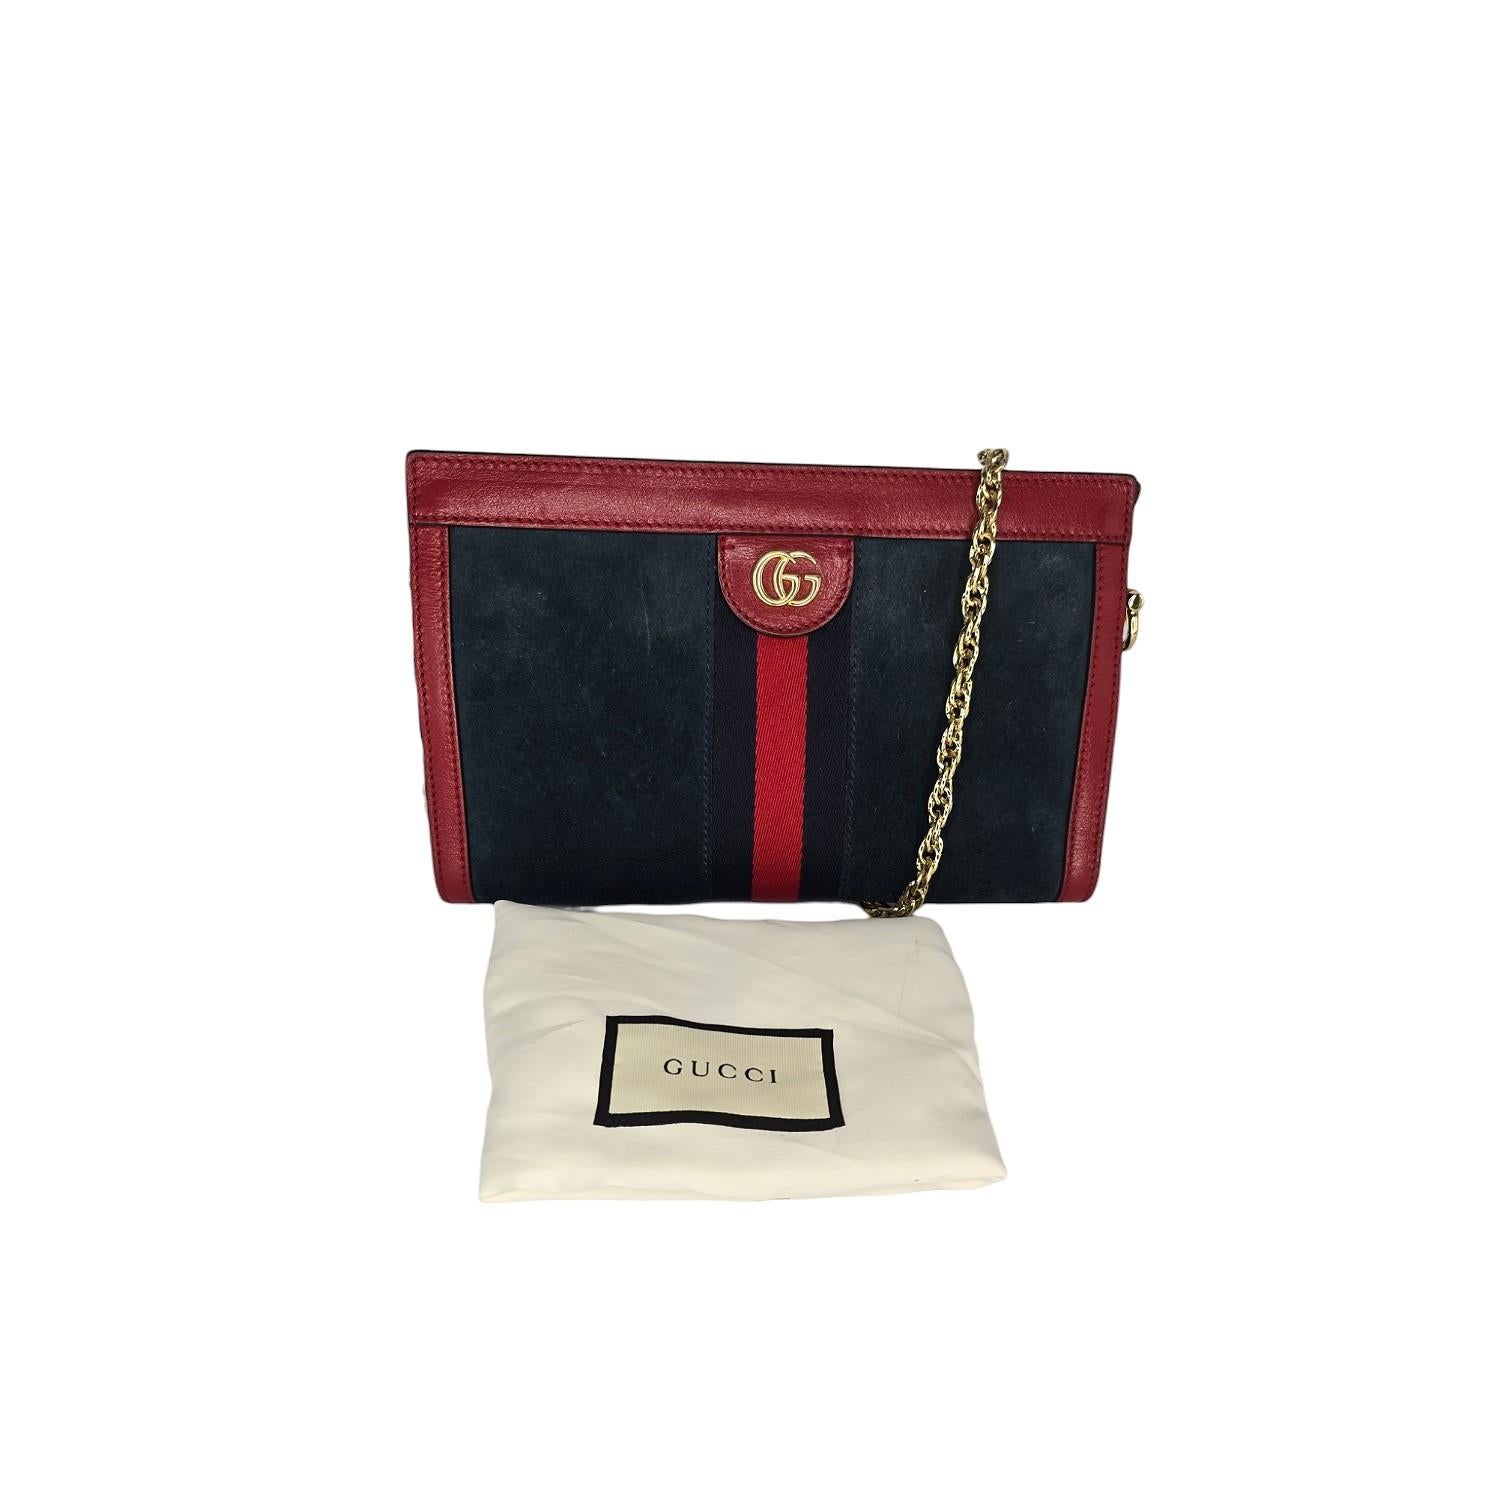 With its sleek and sophisticated design, the Gucci Ophidia Small Suede and Leather Shoulder Bag is the ultimate luxury accessory. Crafted in Italy with black suede and red leather, this bag features a divided beige suede interior with a slip pocket